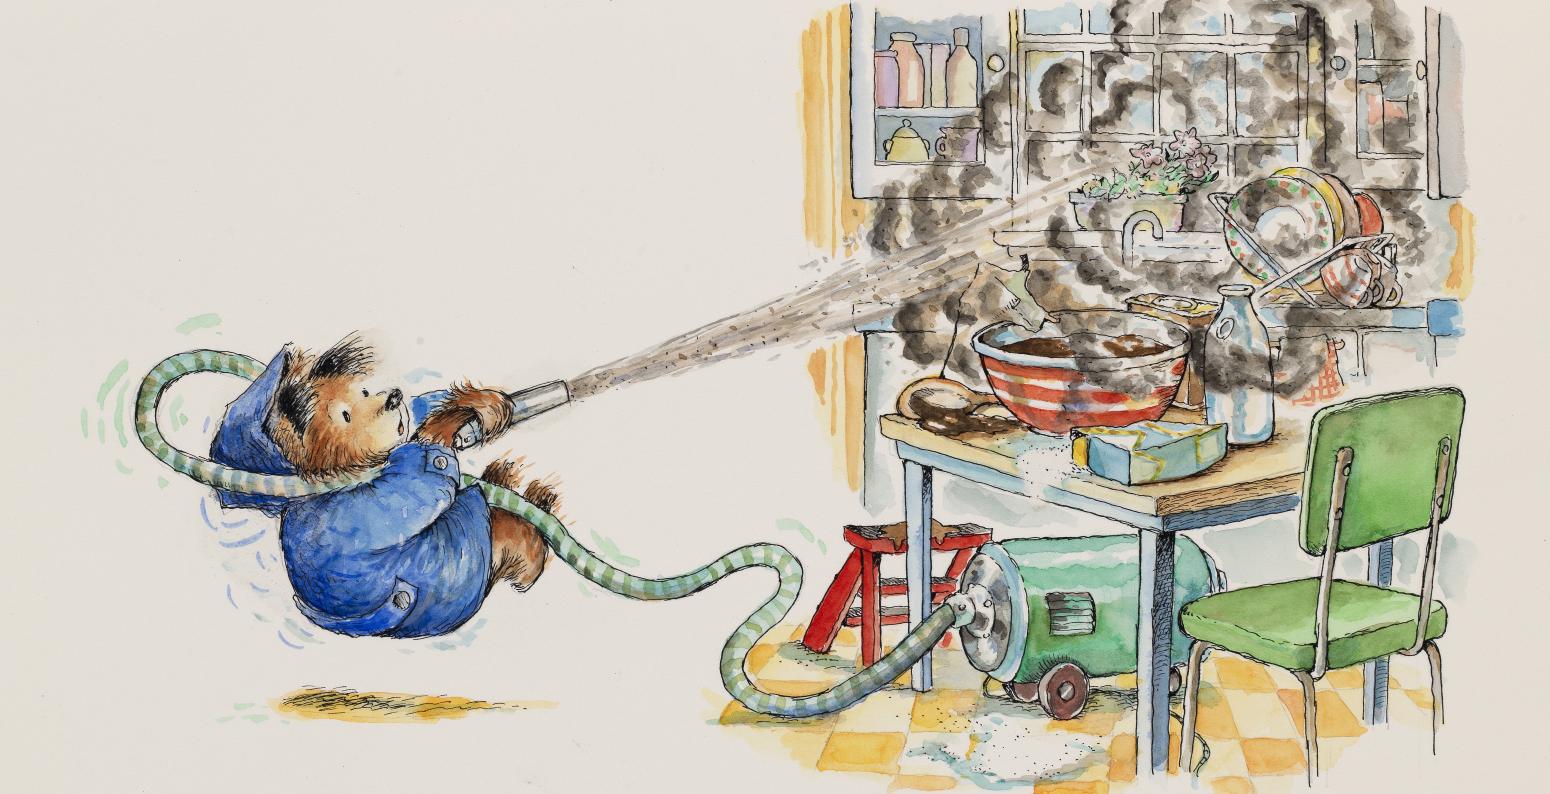 Paddington bear using a vacuum cleaner to try to put out a kitchen fire.